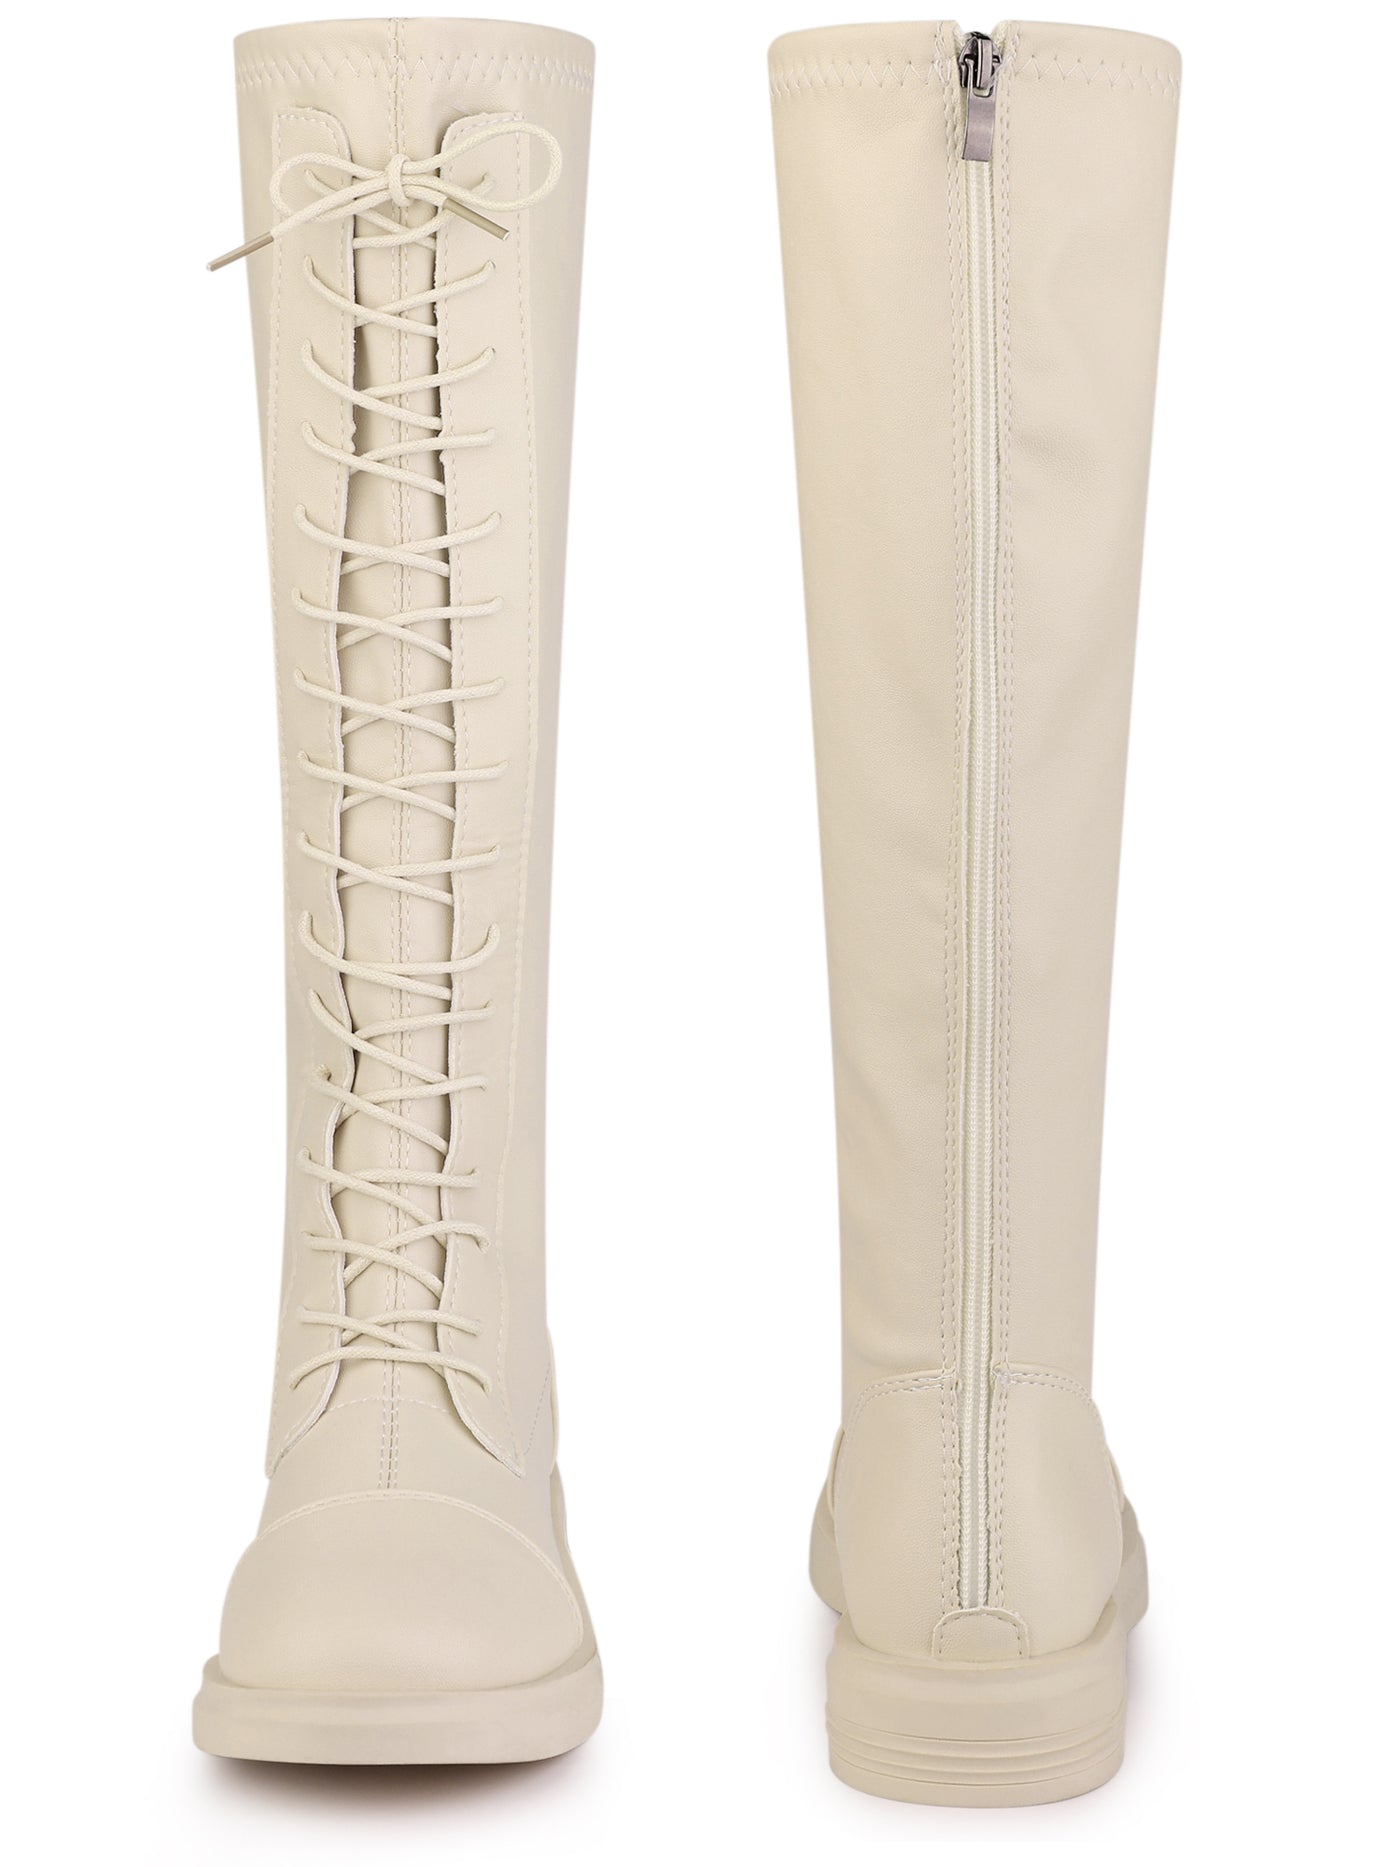 Allegra K Lace Up Round Toe Flat Low Heel Knee High Boots